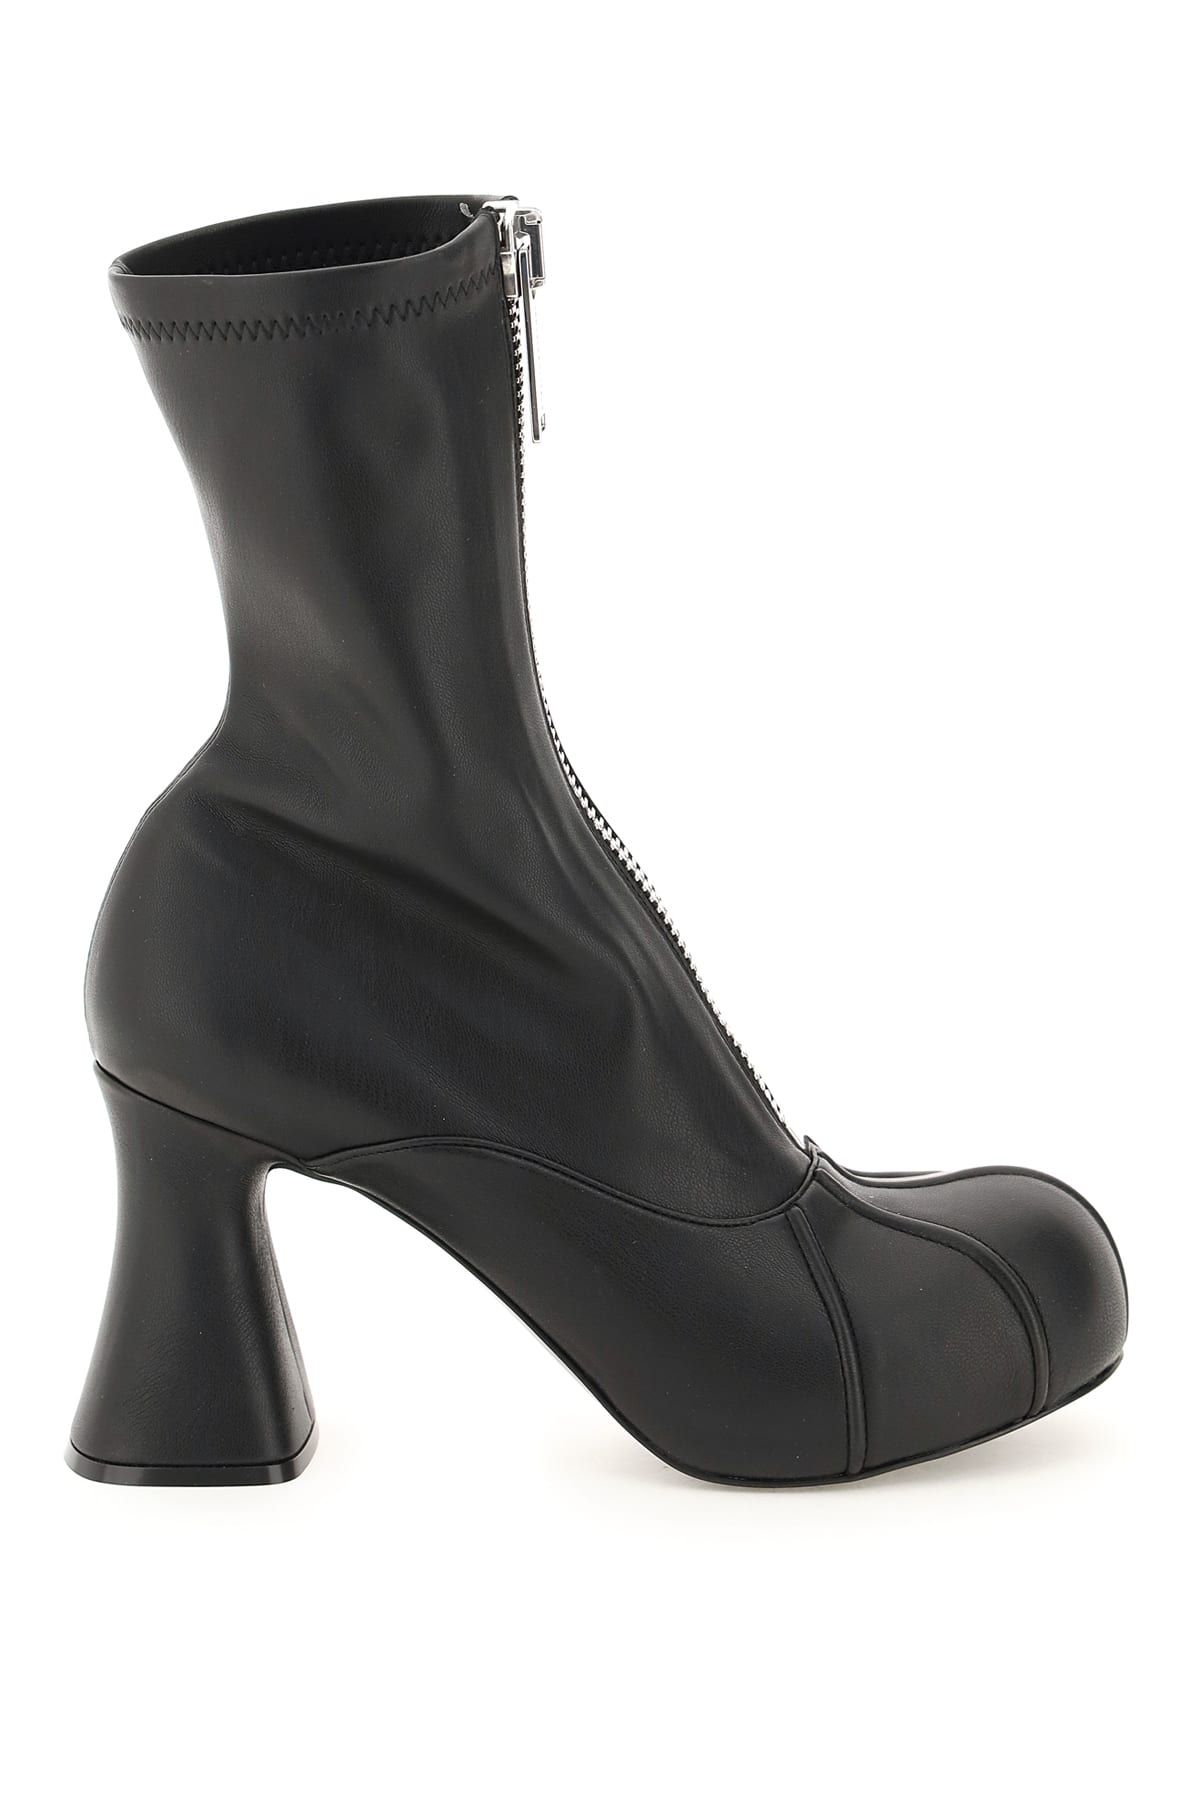 Stella McCartney Groove Stretch Ankle Boots